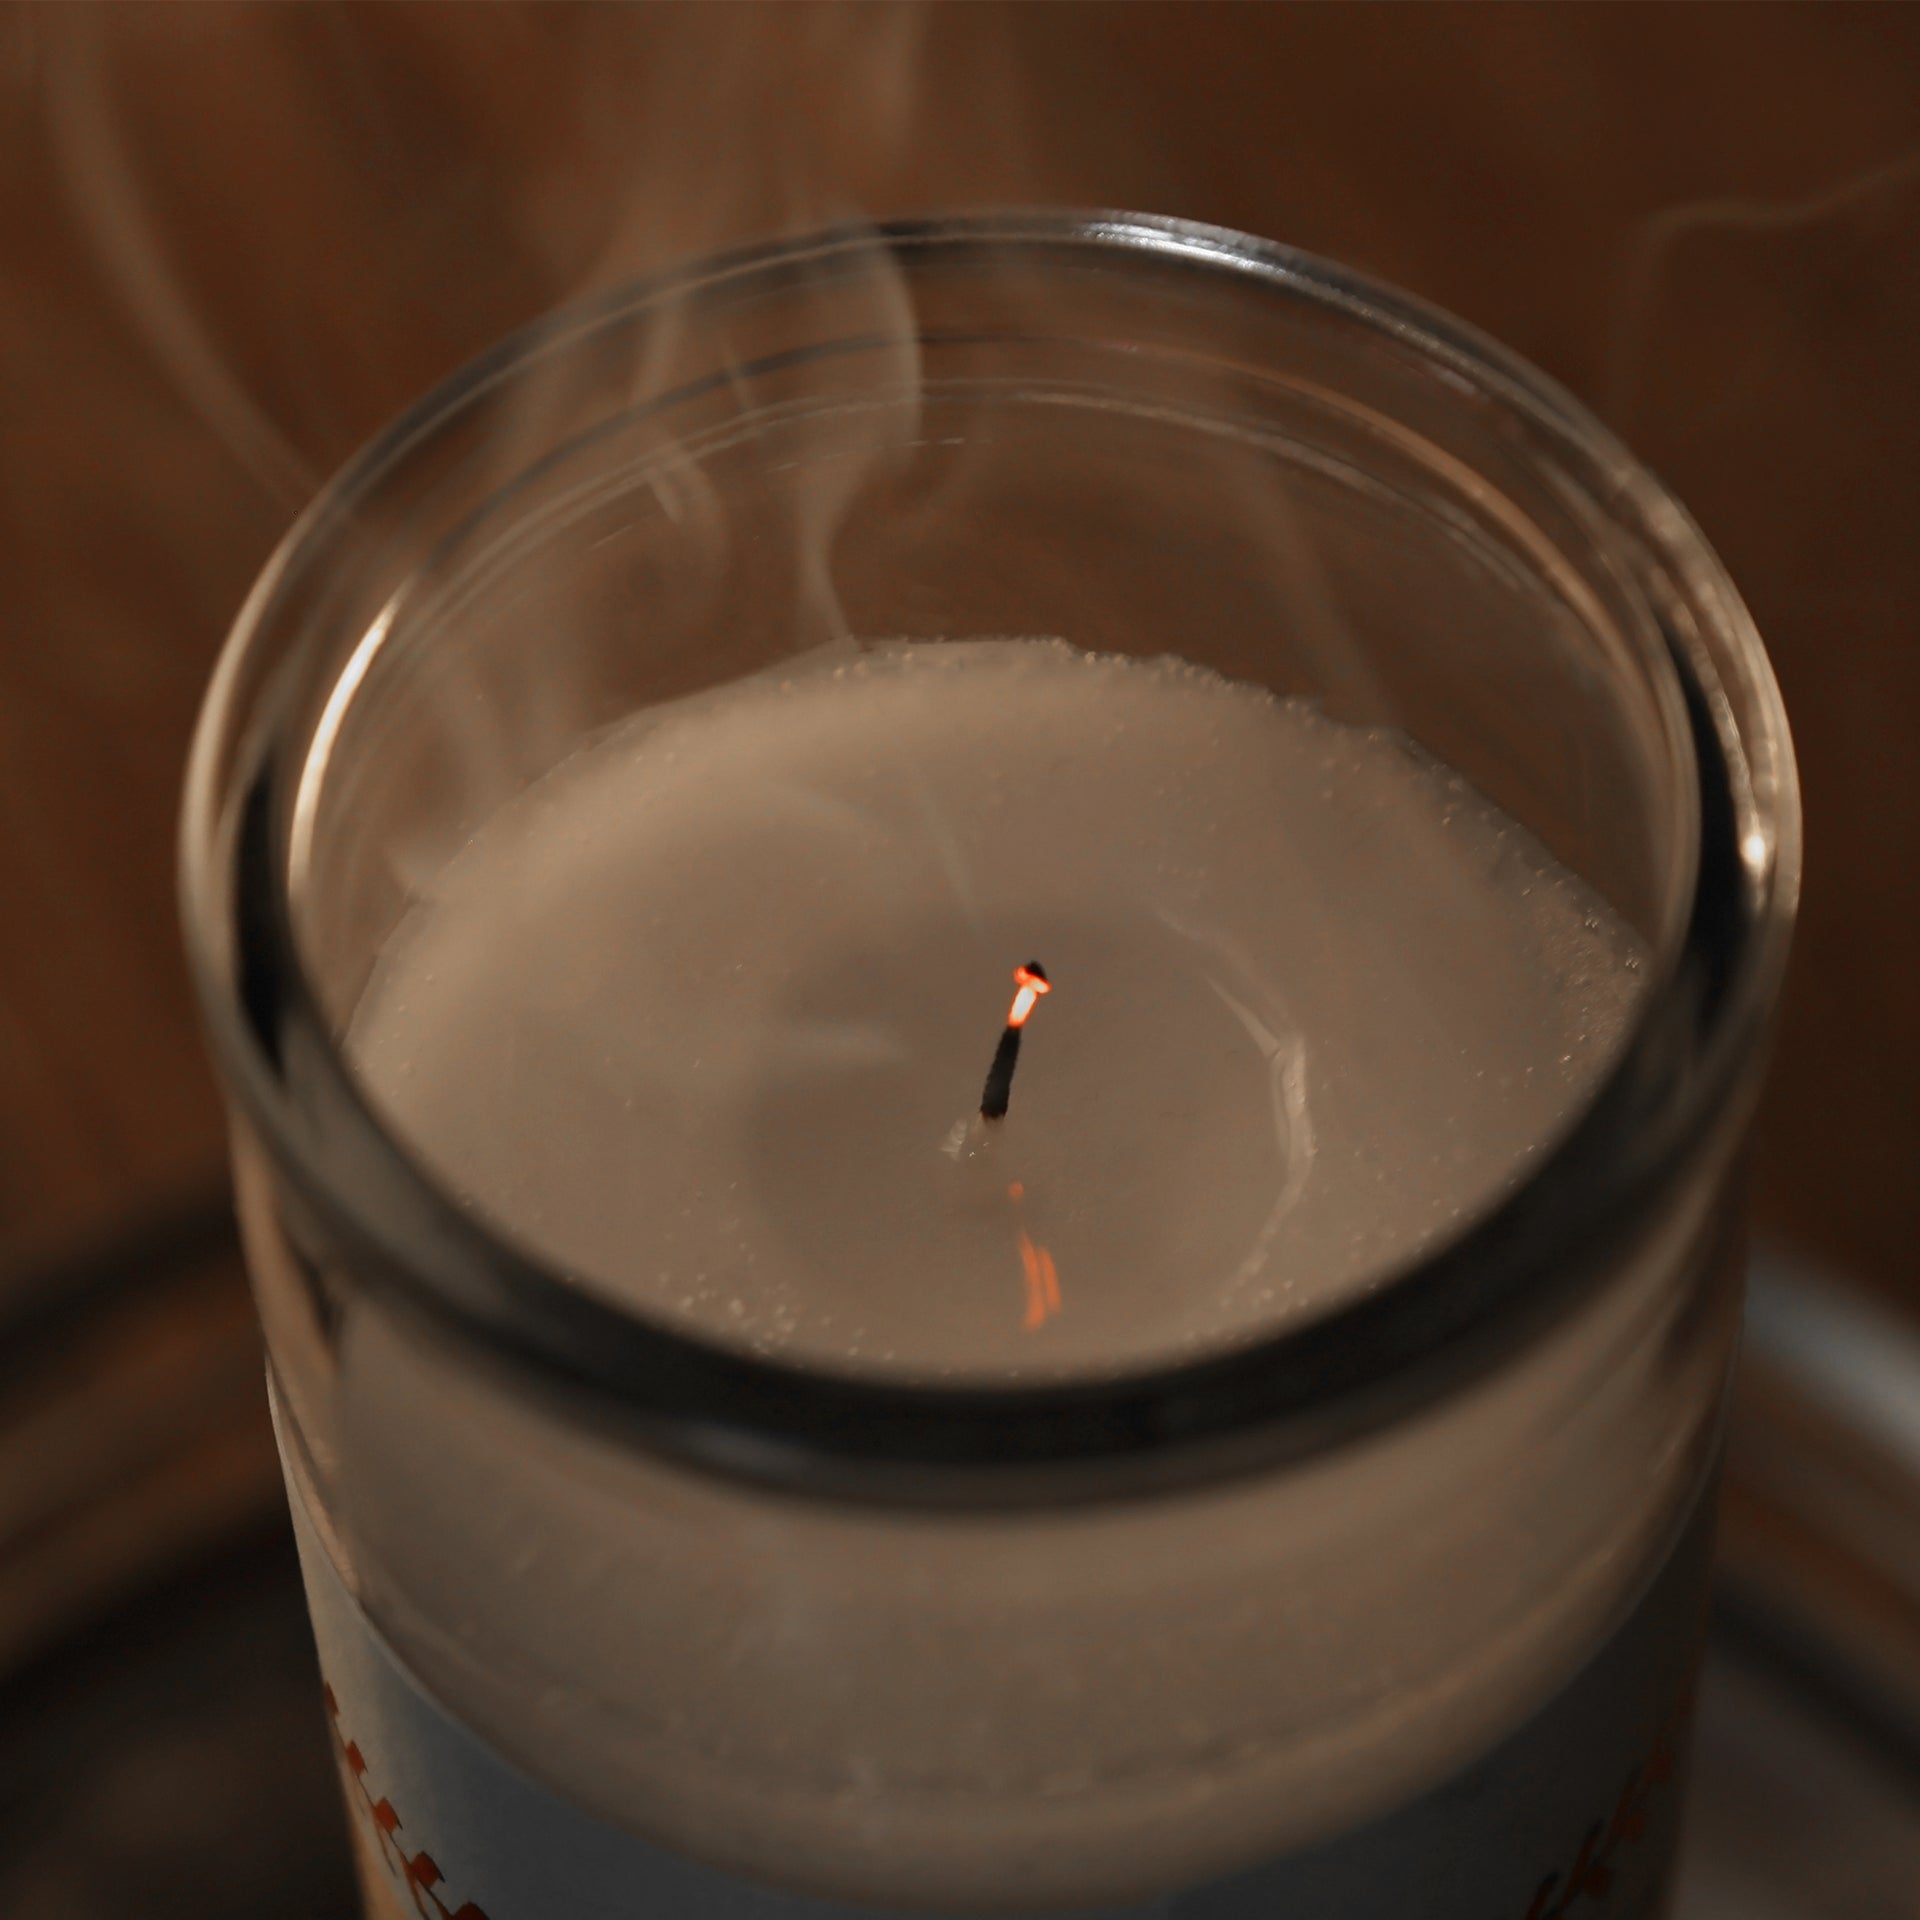 The wick blown out on our Philadelphia Baseball Game Day Juju Unscented Prayer Candle